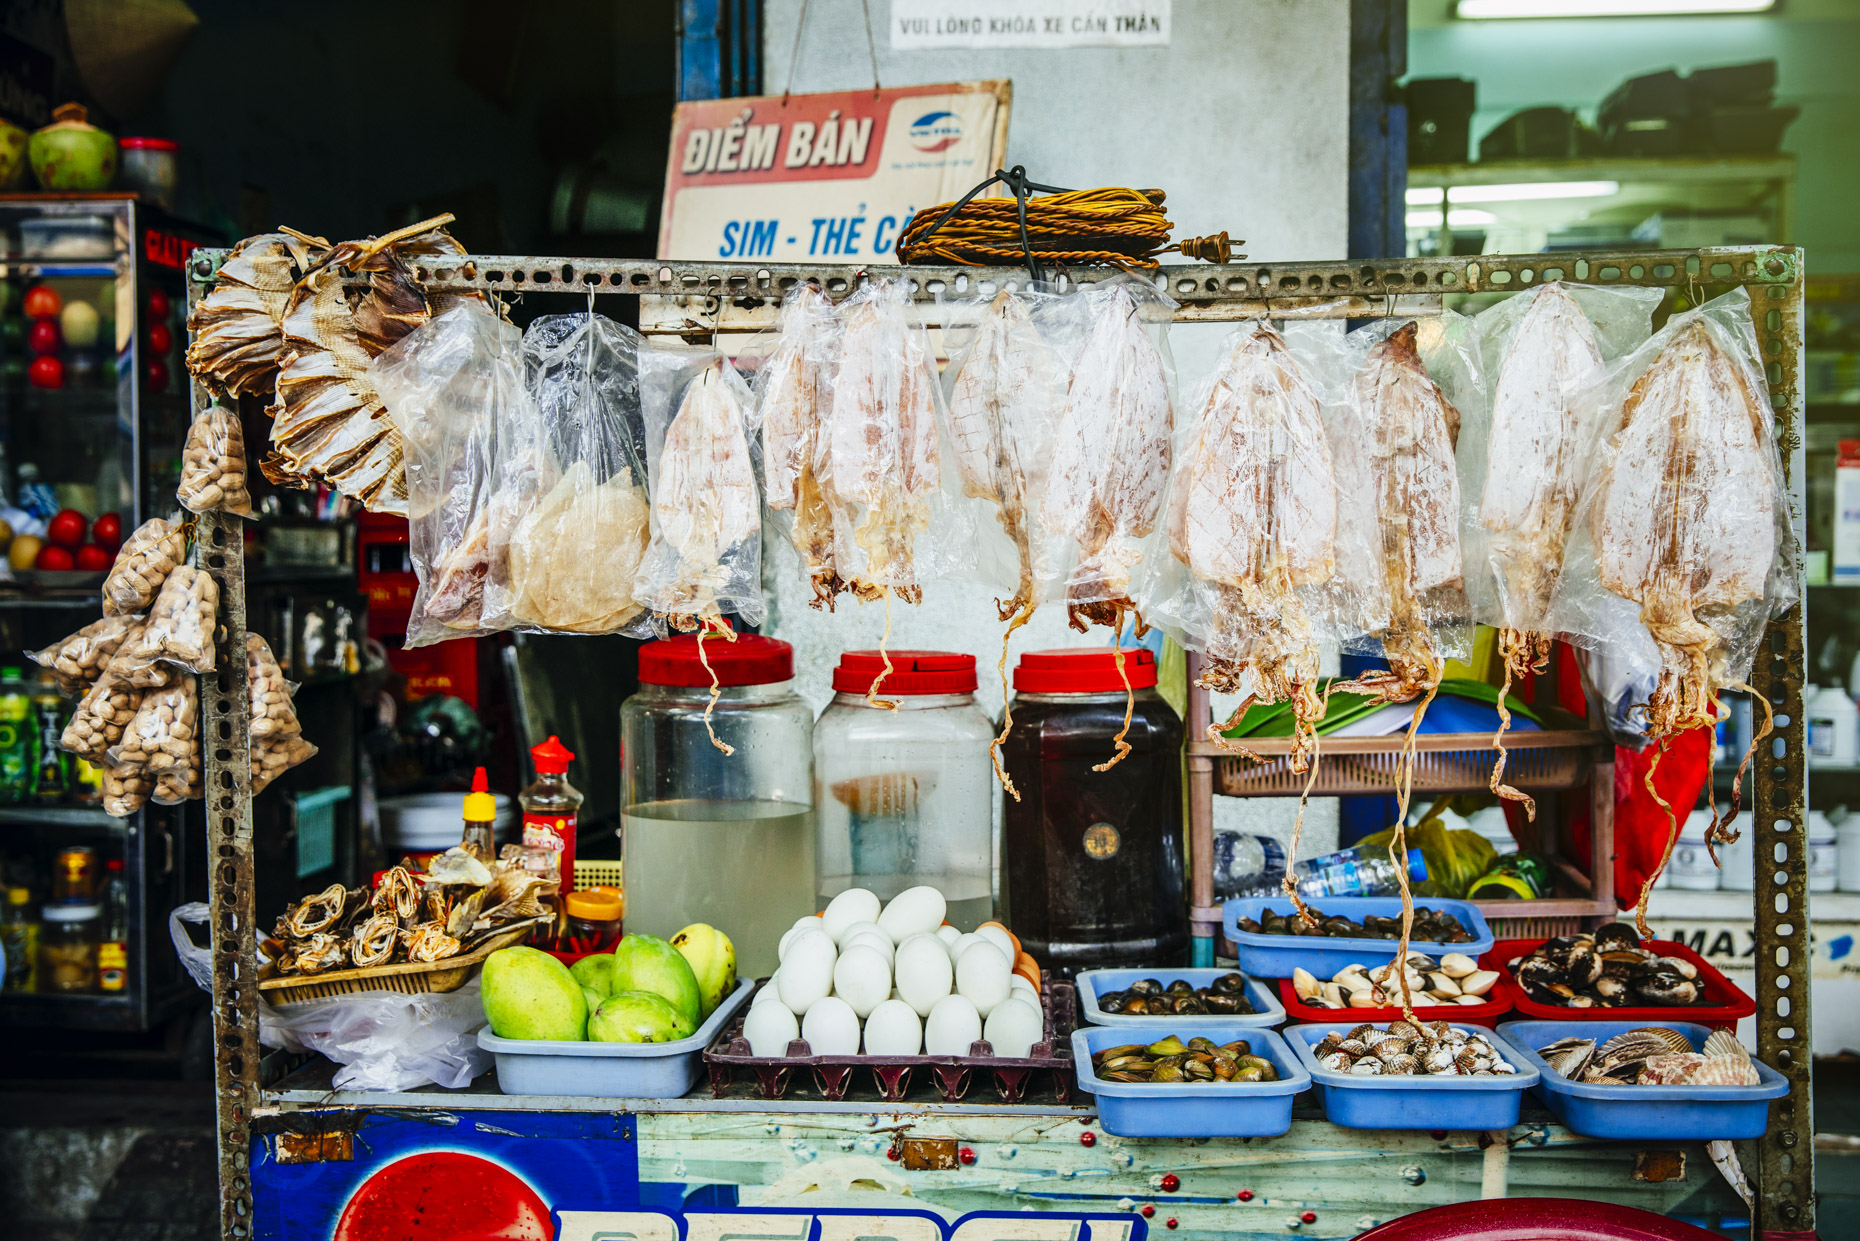 Varied of dried and fresh fish, eggs, and produce on street vendor